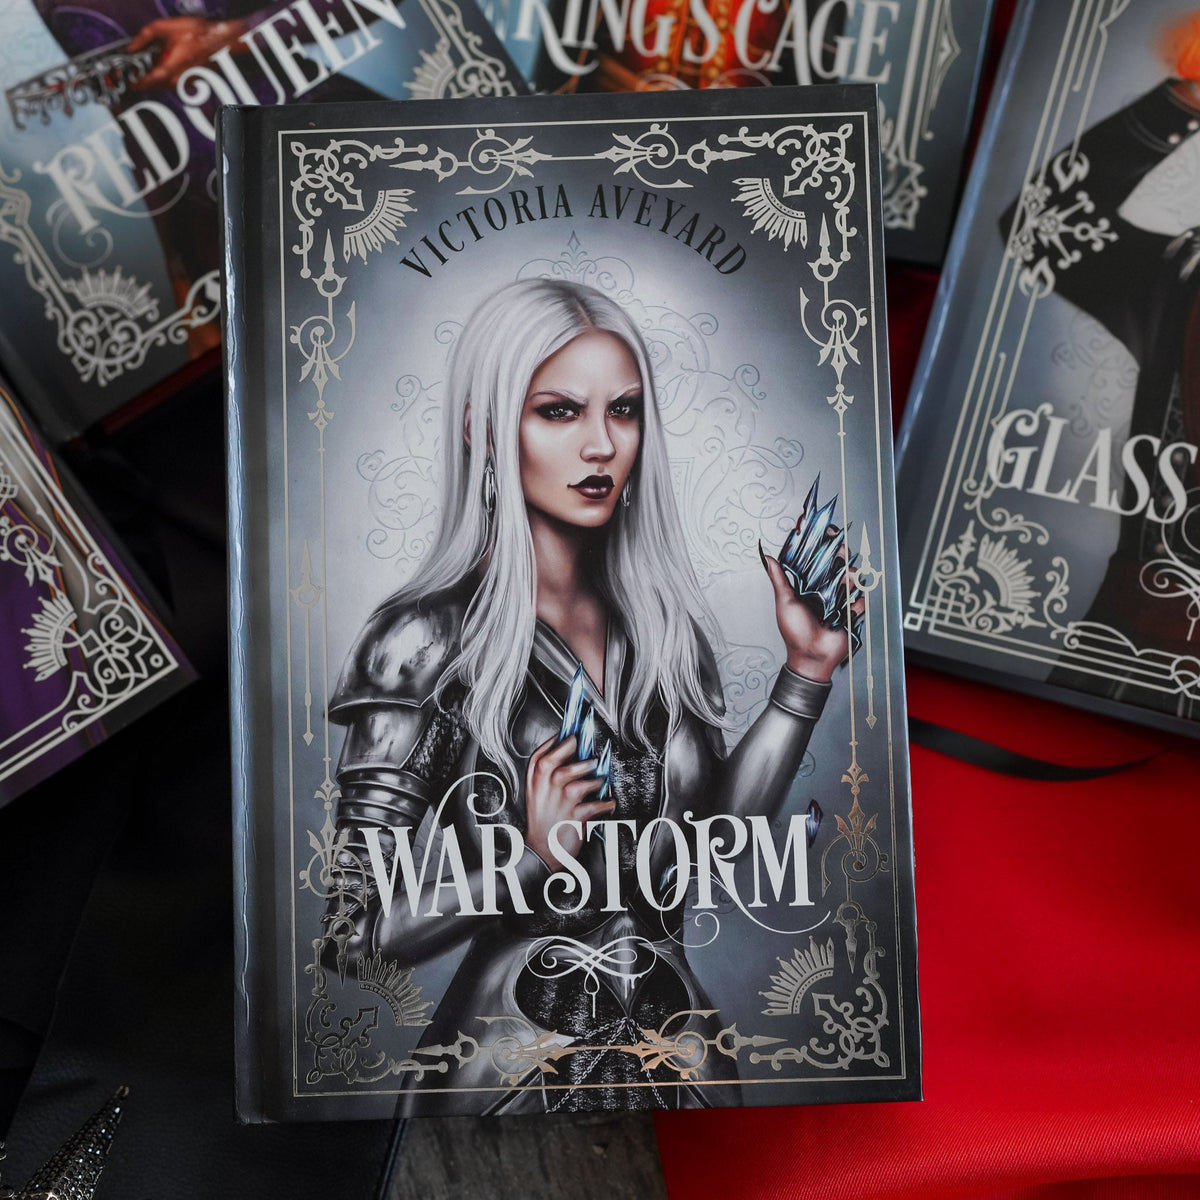 War Storm book 4 featuring Evangeline wearing metal to use her magnetron ability, as well as holding a broken crown.